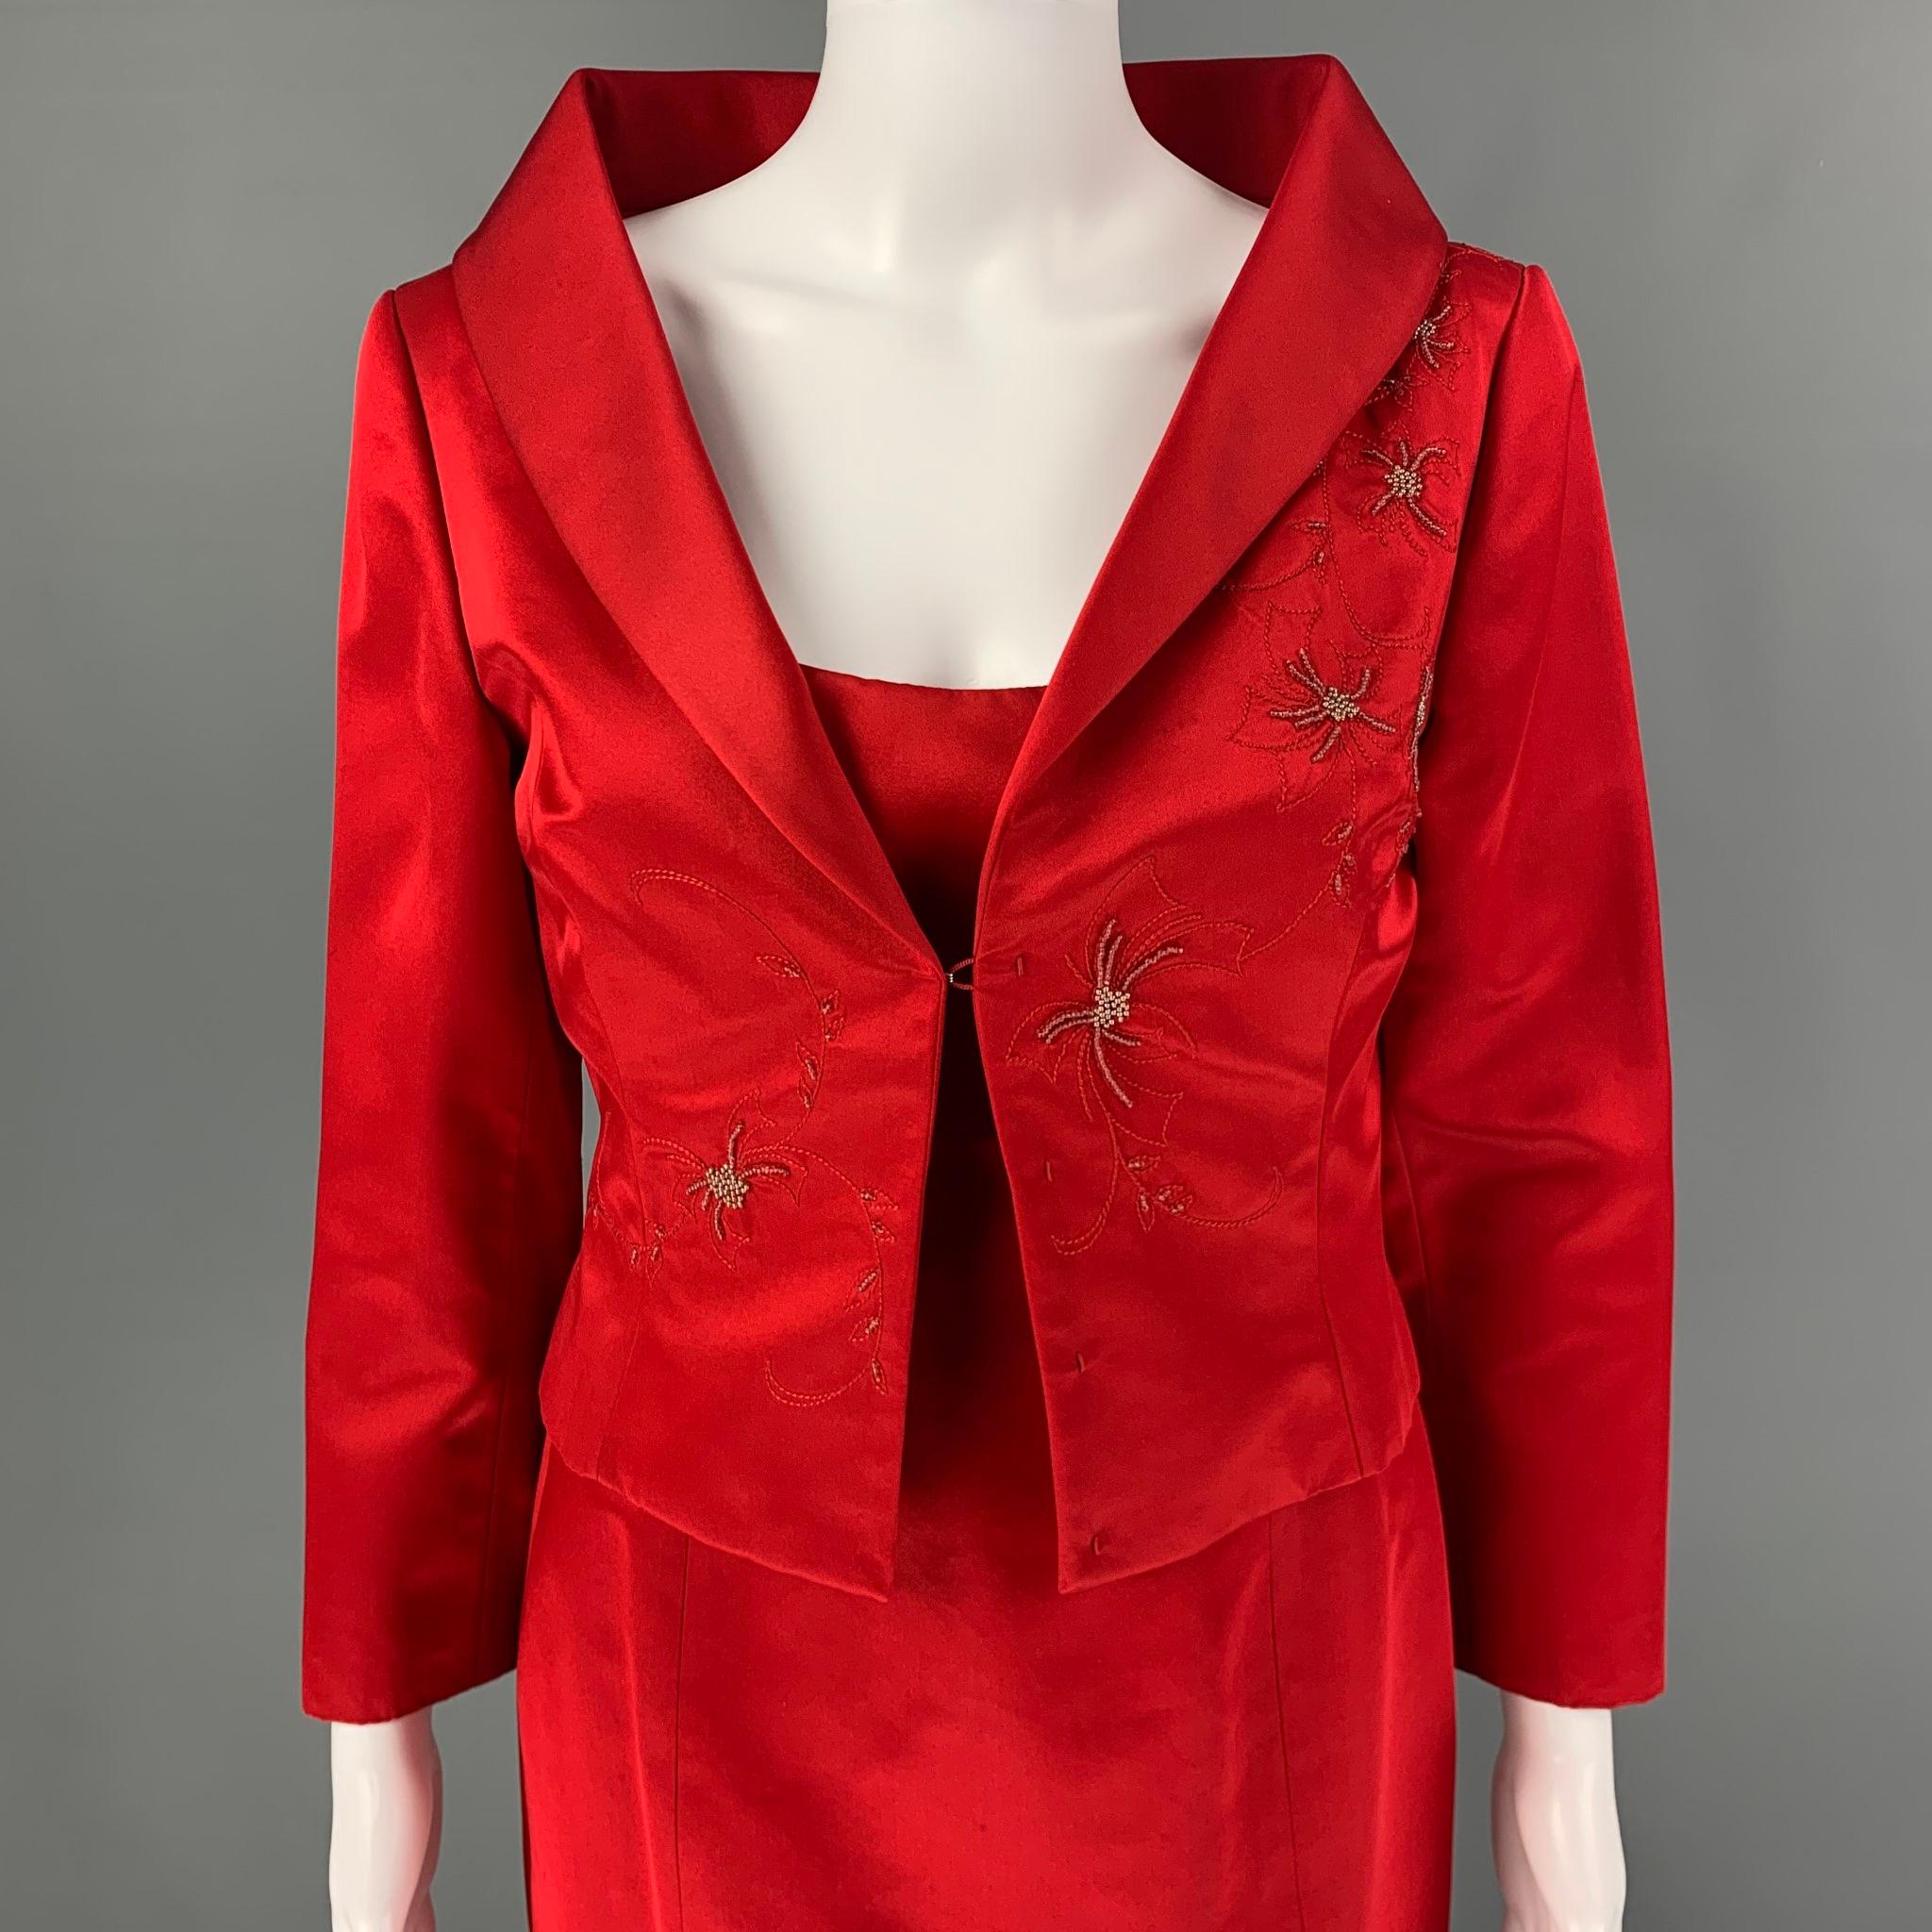 RICHARD TYLER Couture 2 Piece Set comes in a red silk / rayon featuring an a-line style dress, elastic straps, side zipper closure, and a includes a shawl collar jacket with beaded embellishments. 

Excellent Pre-Owned Condition.
Marked: